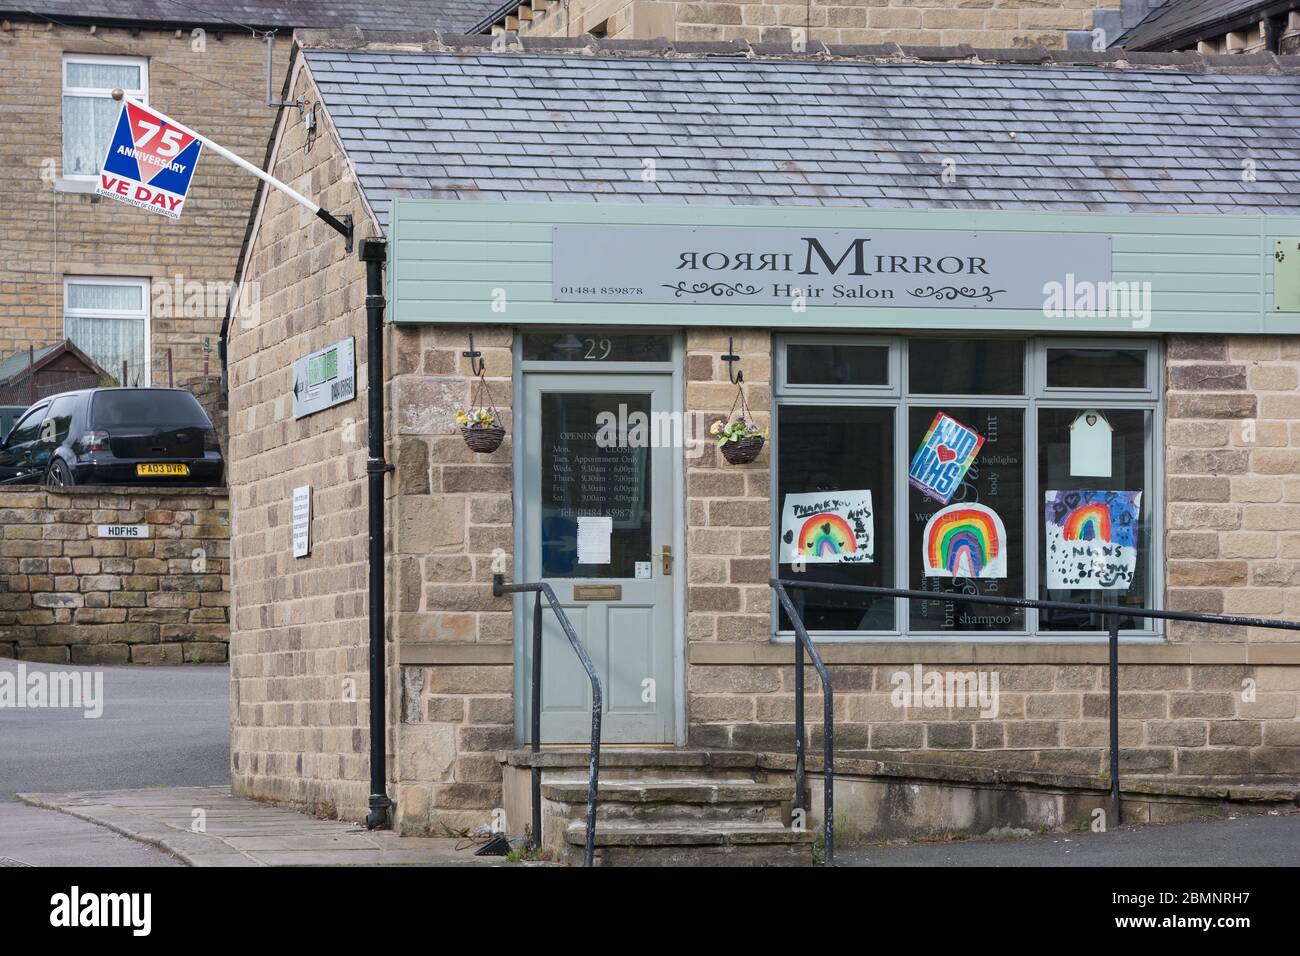 Meltham, UK - May 5 2020: A VE day flag and rainbow drawings displayed on a hair salon in Meltham, West Yorkshire. Stock Photo